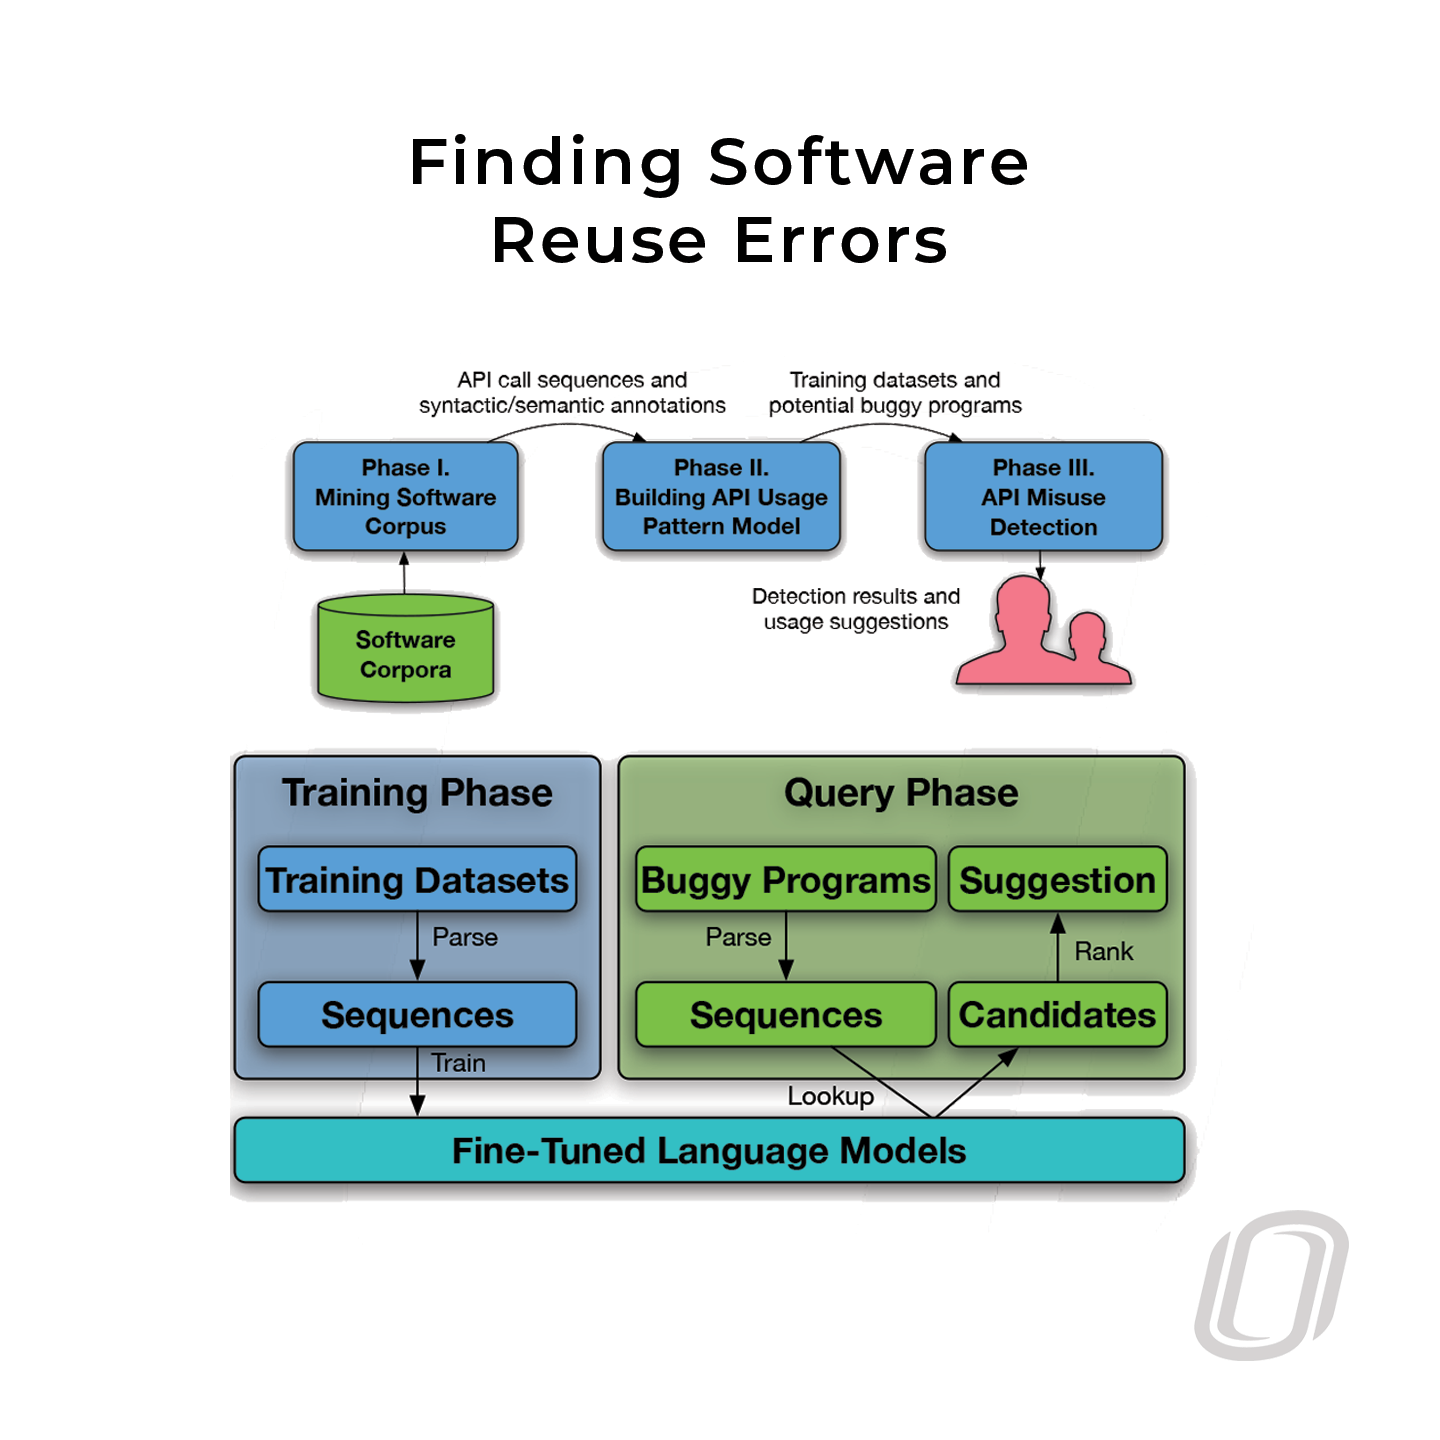 a detailed diagram that shows how to find software reuse errors